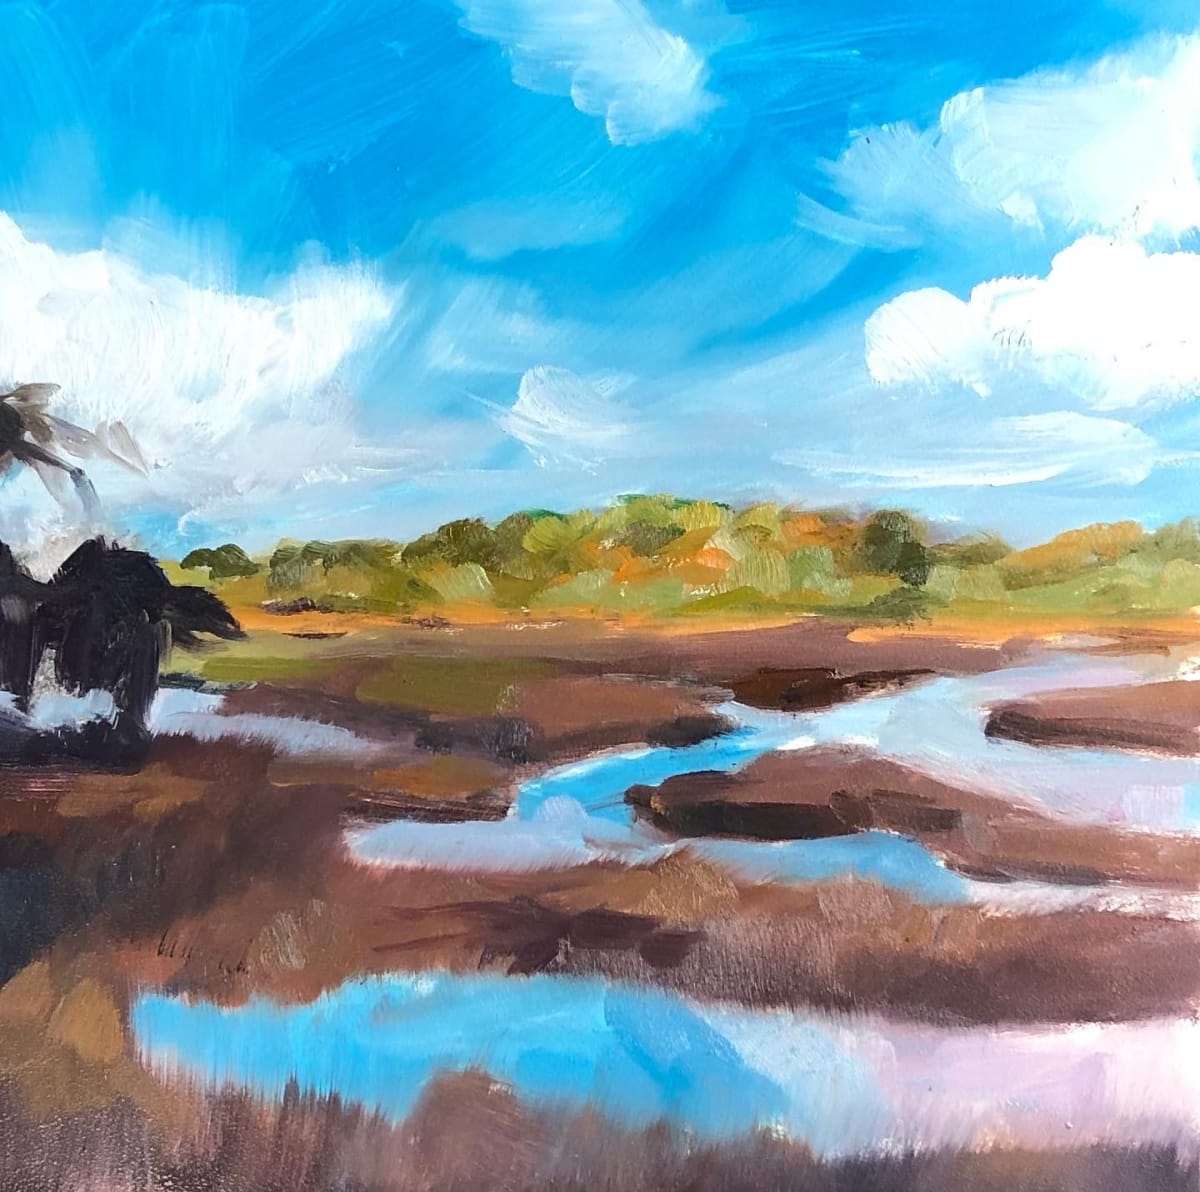 small scape-low country #5  Image: Scape Sketch Collection-special places on my journey of life

scape sketch-low country #5

6x6 oil on ampersand museum gesso panel 2022

This painting was inspired by the views of the marshlands in the low country of South Carolina.